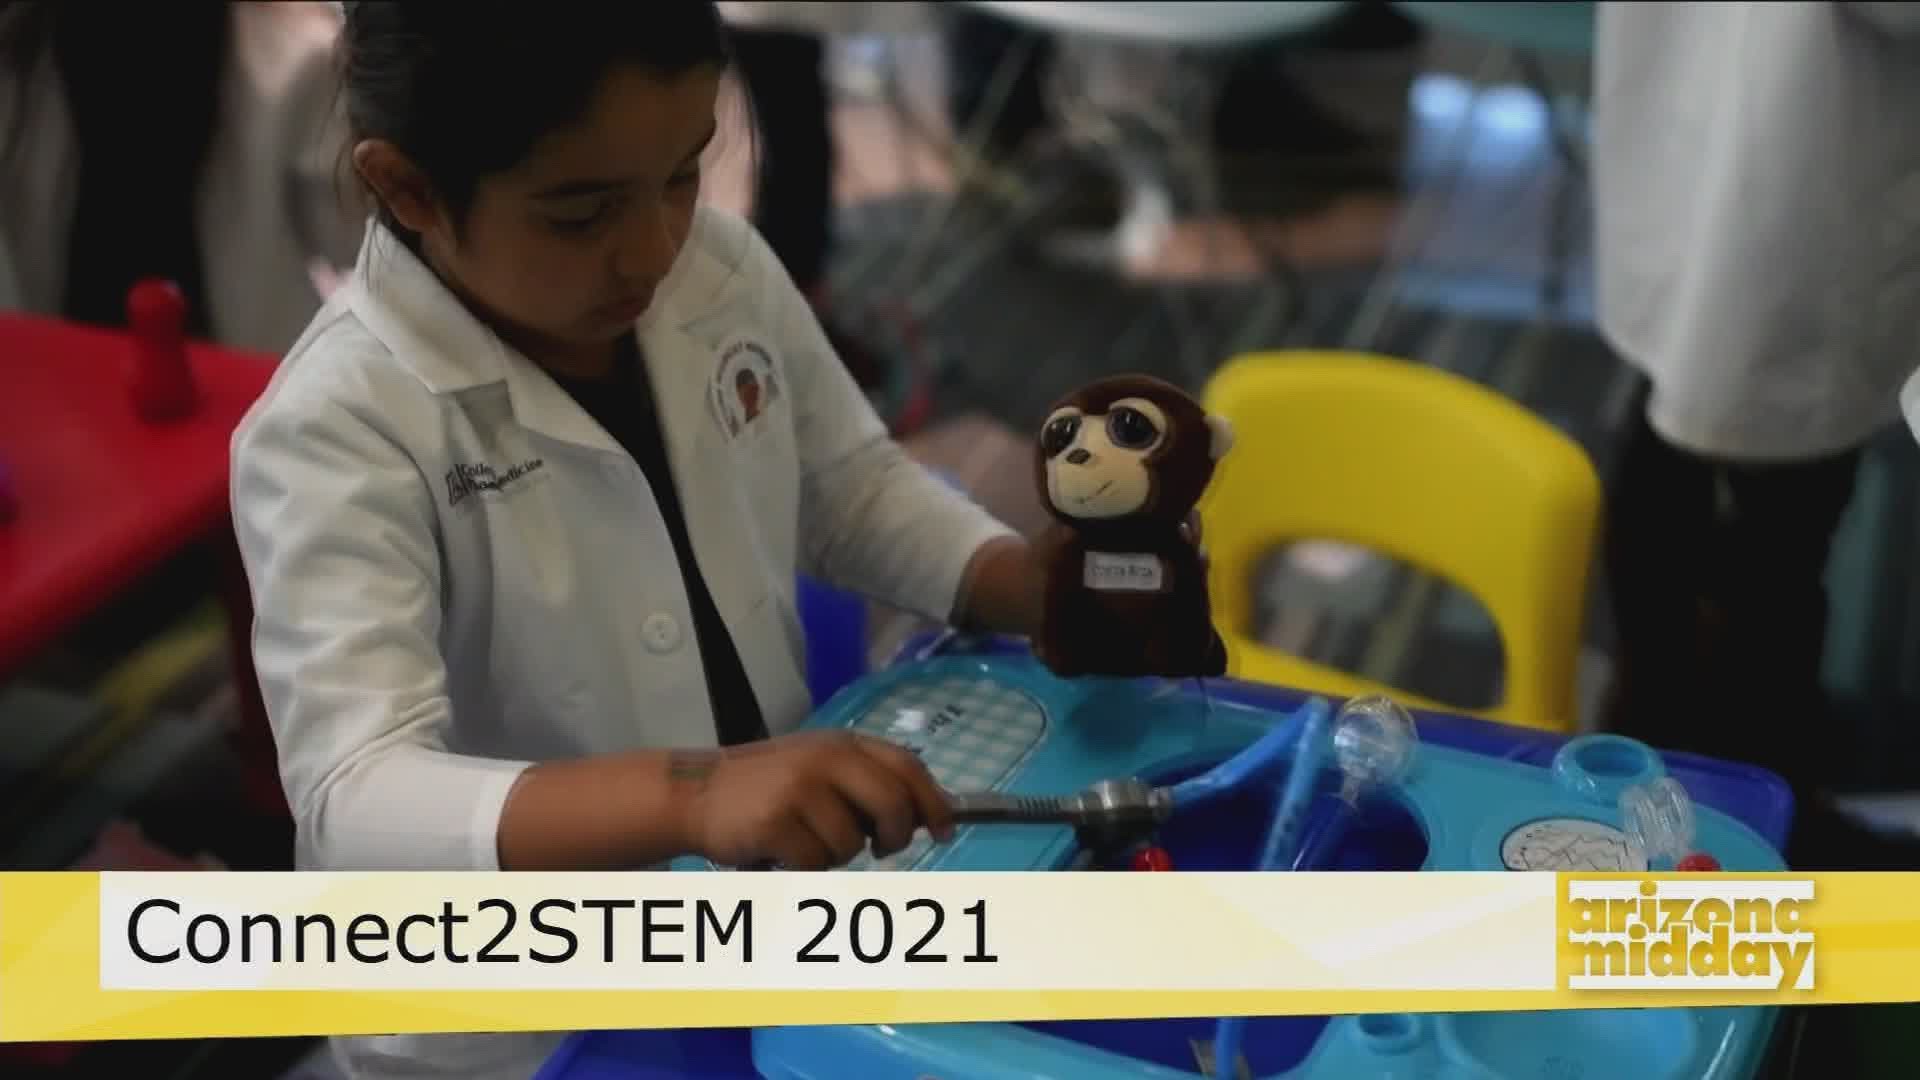 We find out how the kids can have fun with science, tech, engineering and more as this year's Connect2STEM goes virtual